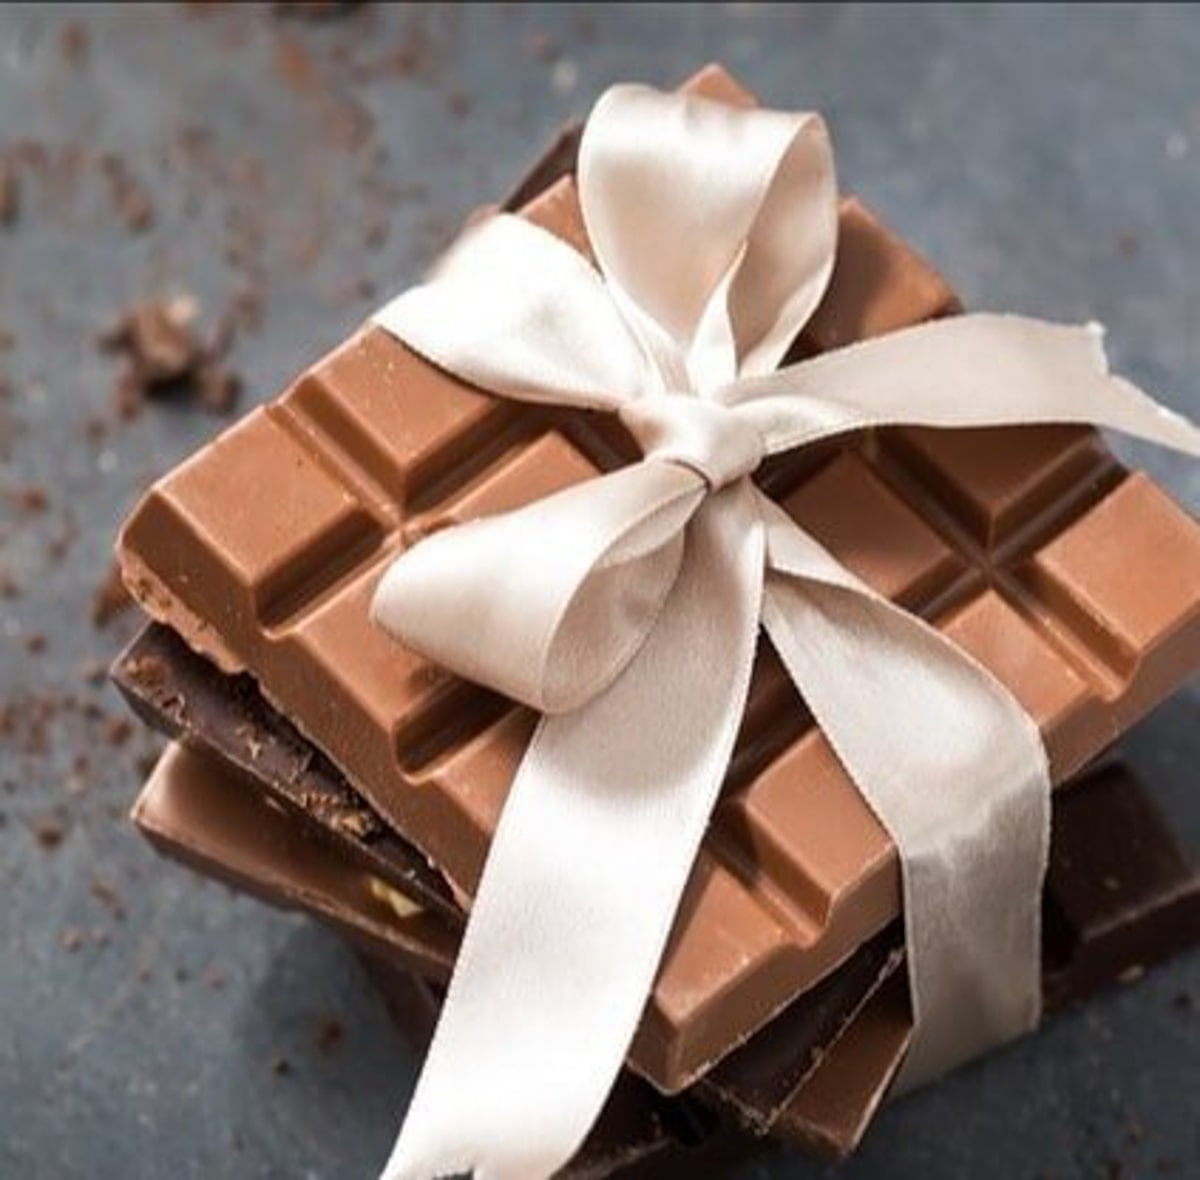 A wrapped gift of chocolate bars with a white silk bow